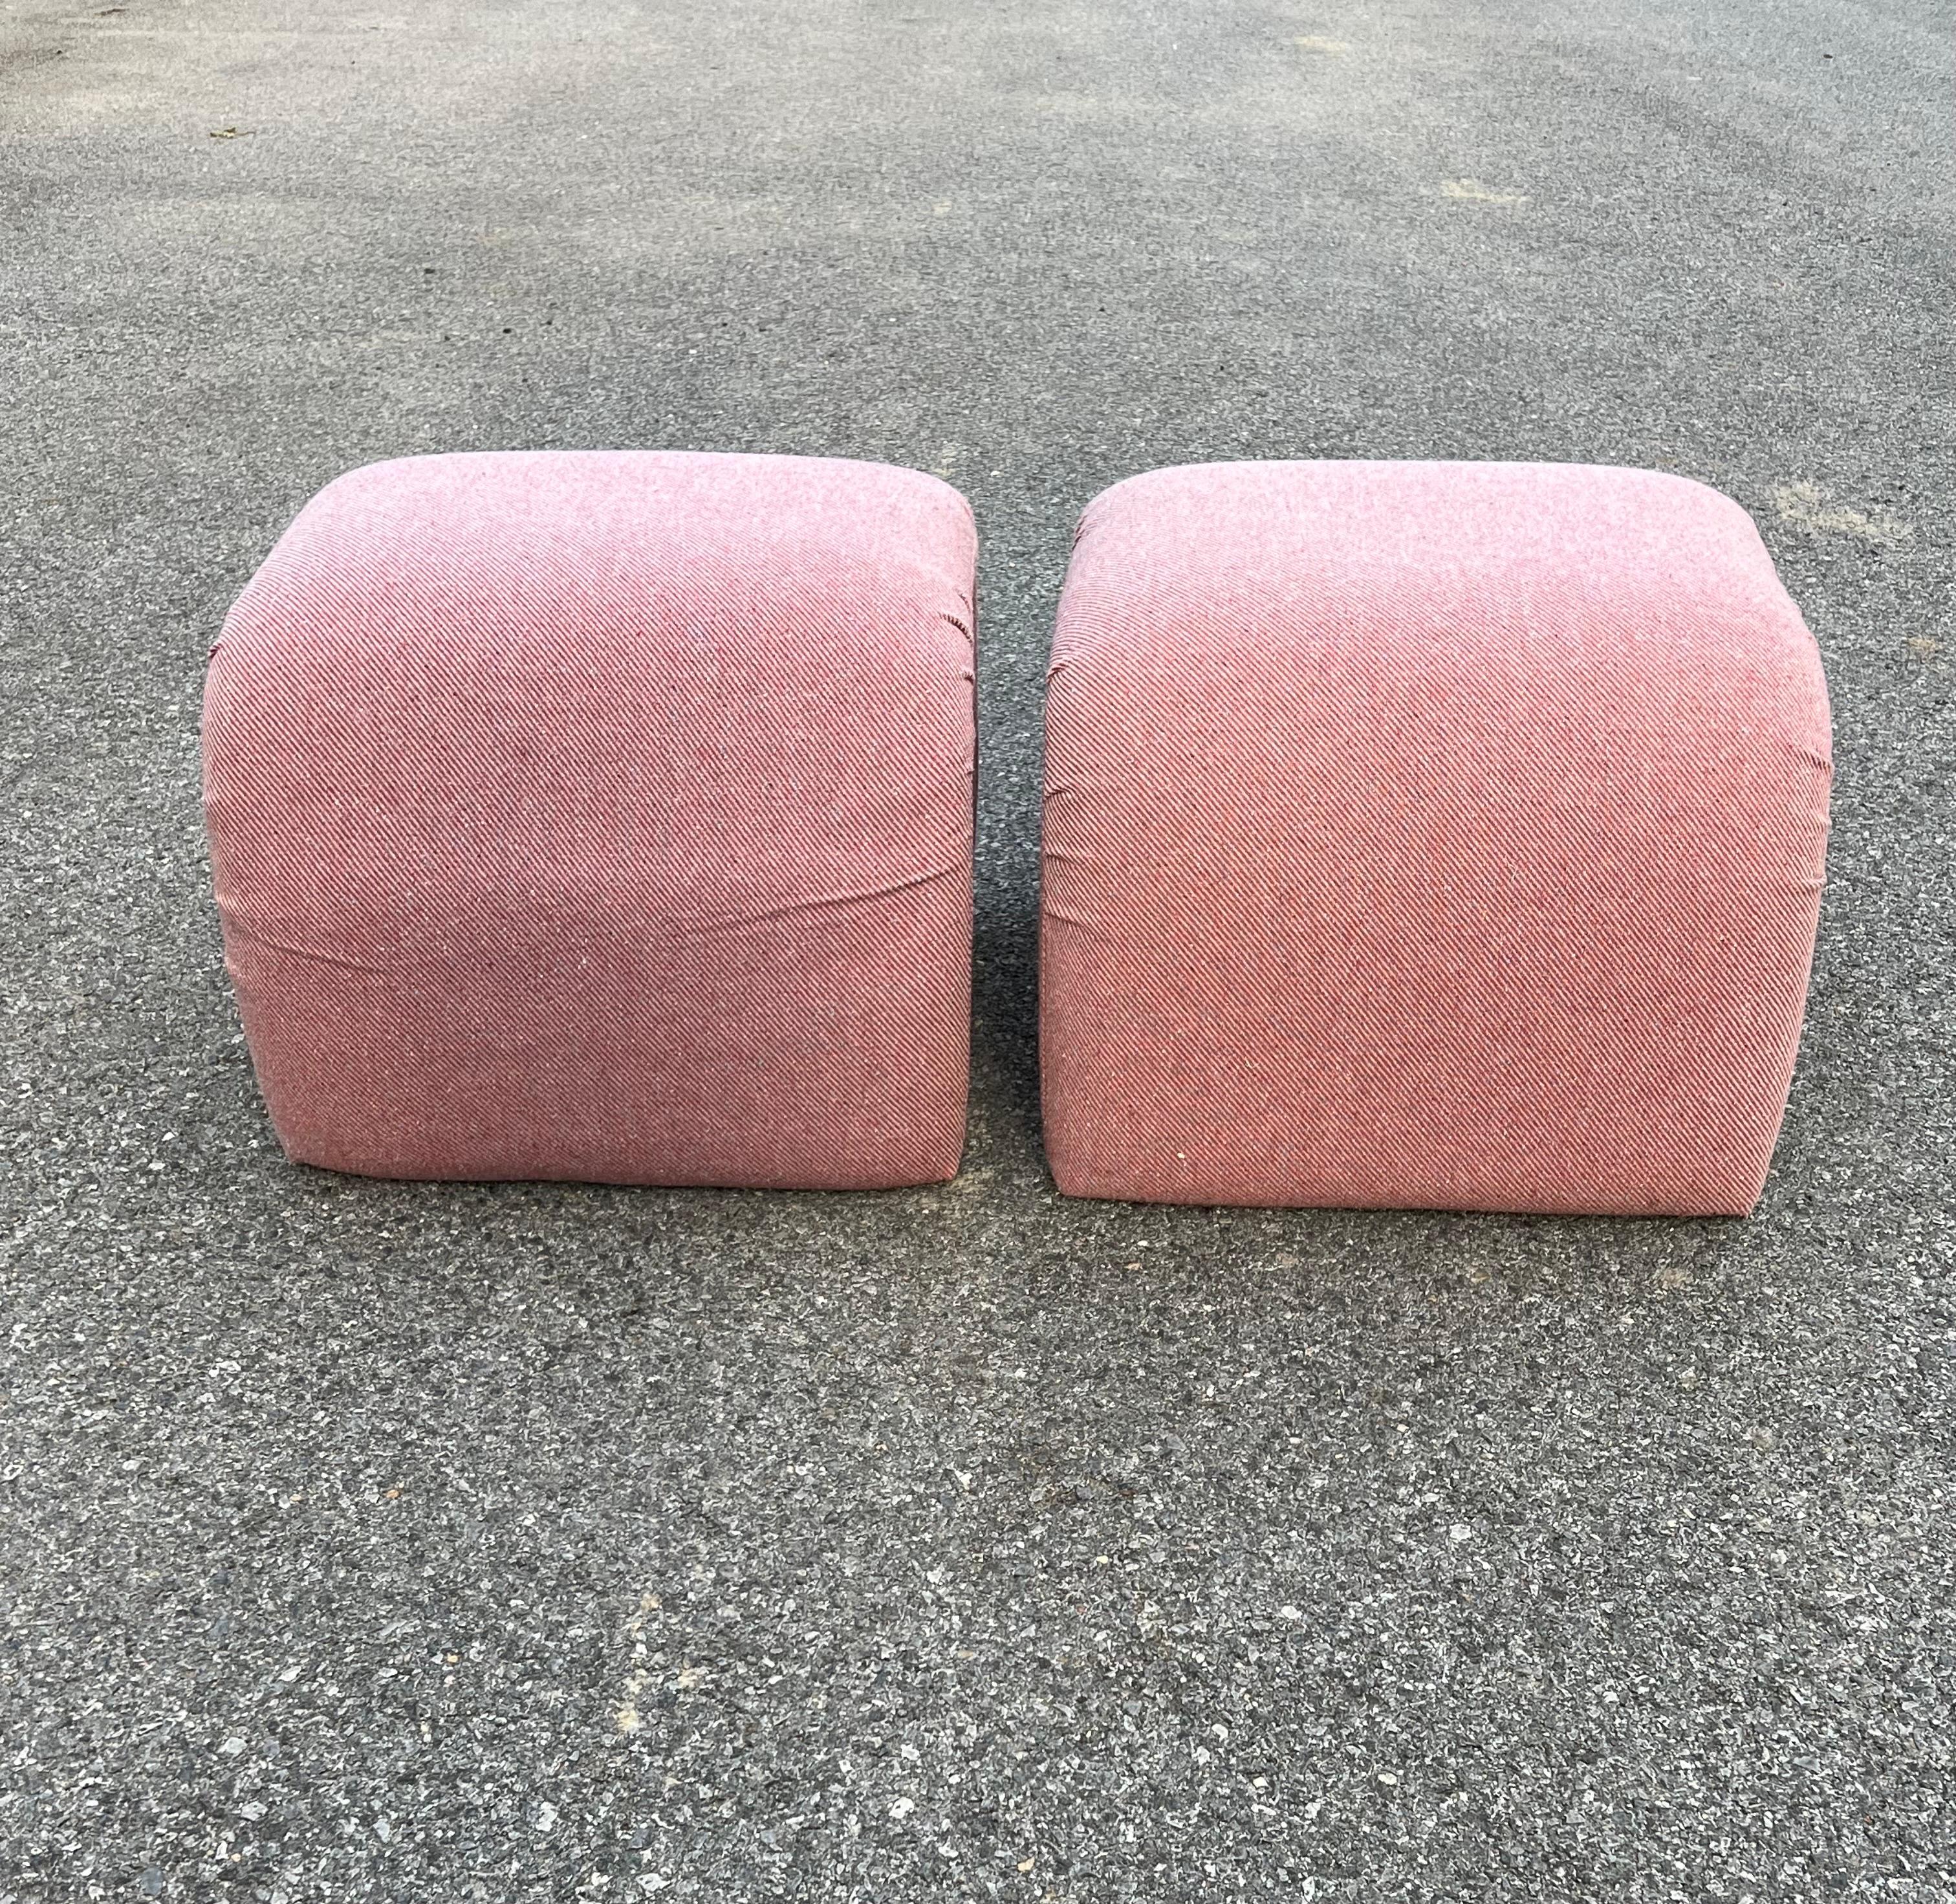 Pair of very trendy pink waterfall ottomans in very good vintage condition, this style can be seen in all home decor magazines, you can use these ottomans at end of beds, living room, under a console table for extra seating when needed, foyer… you